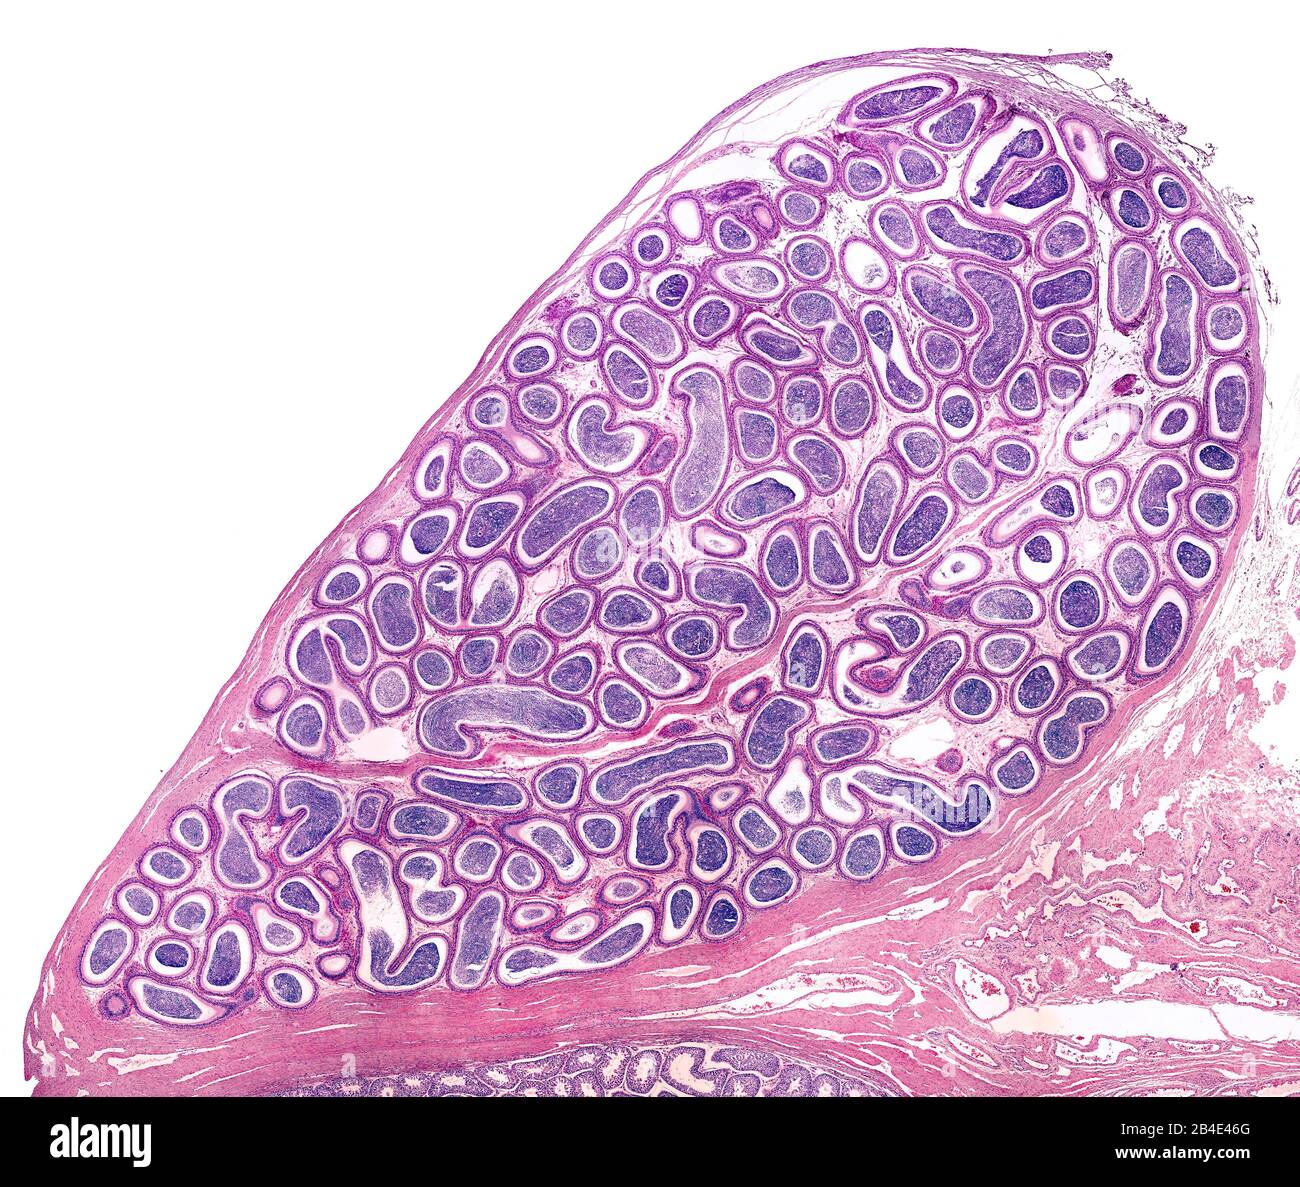 Human epididymis in their anatomical location joined to testicle (located in the bottom border of the image). The epididymal duct is a long tube very Stock Photo